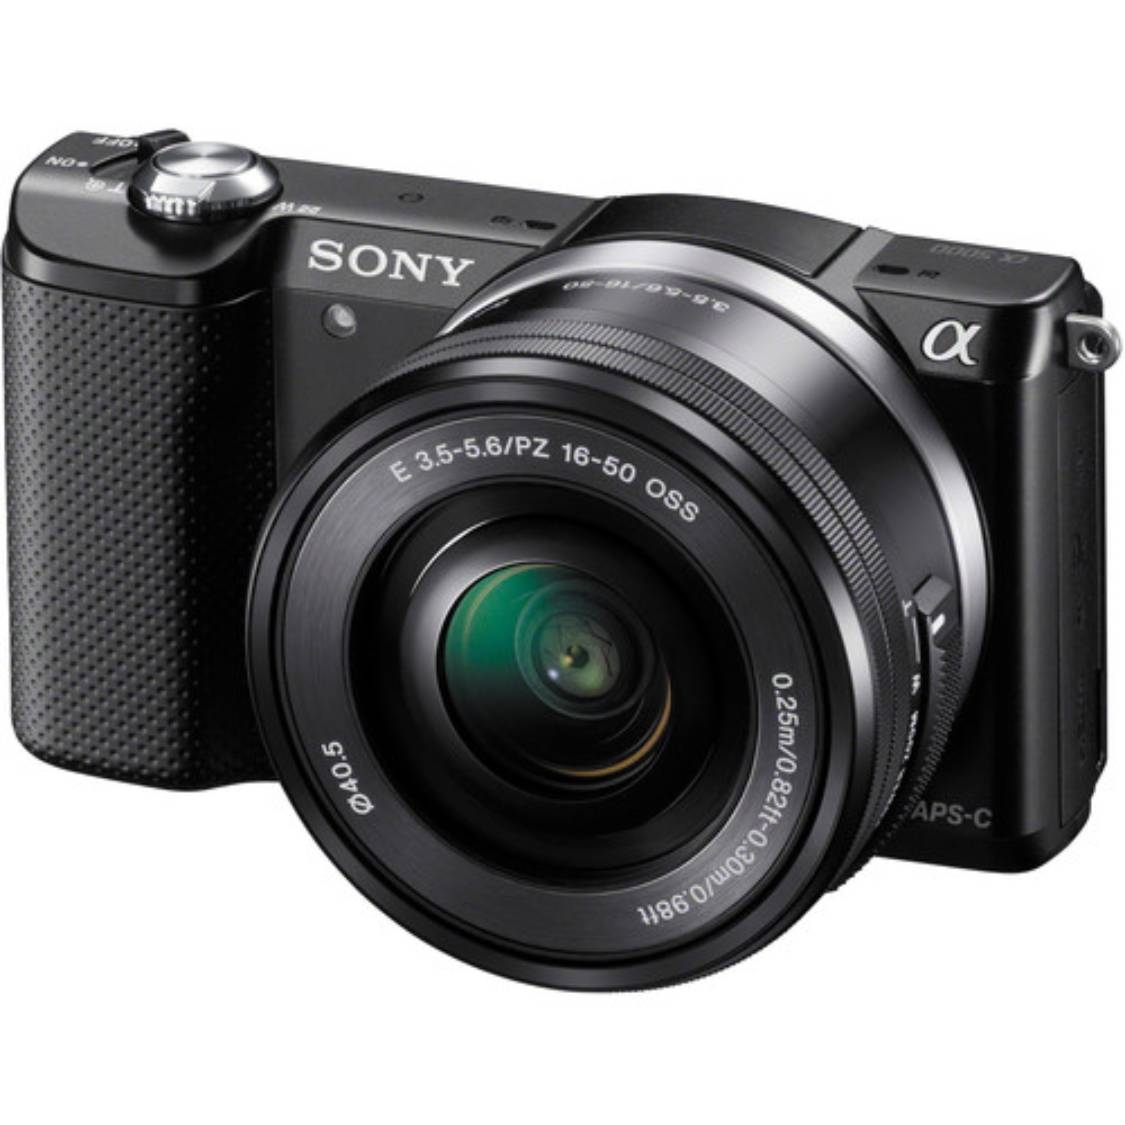 Sony A5000 Digital Camera (black) with 16-50mm OSS Lens -Open Box